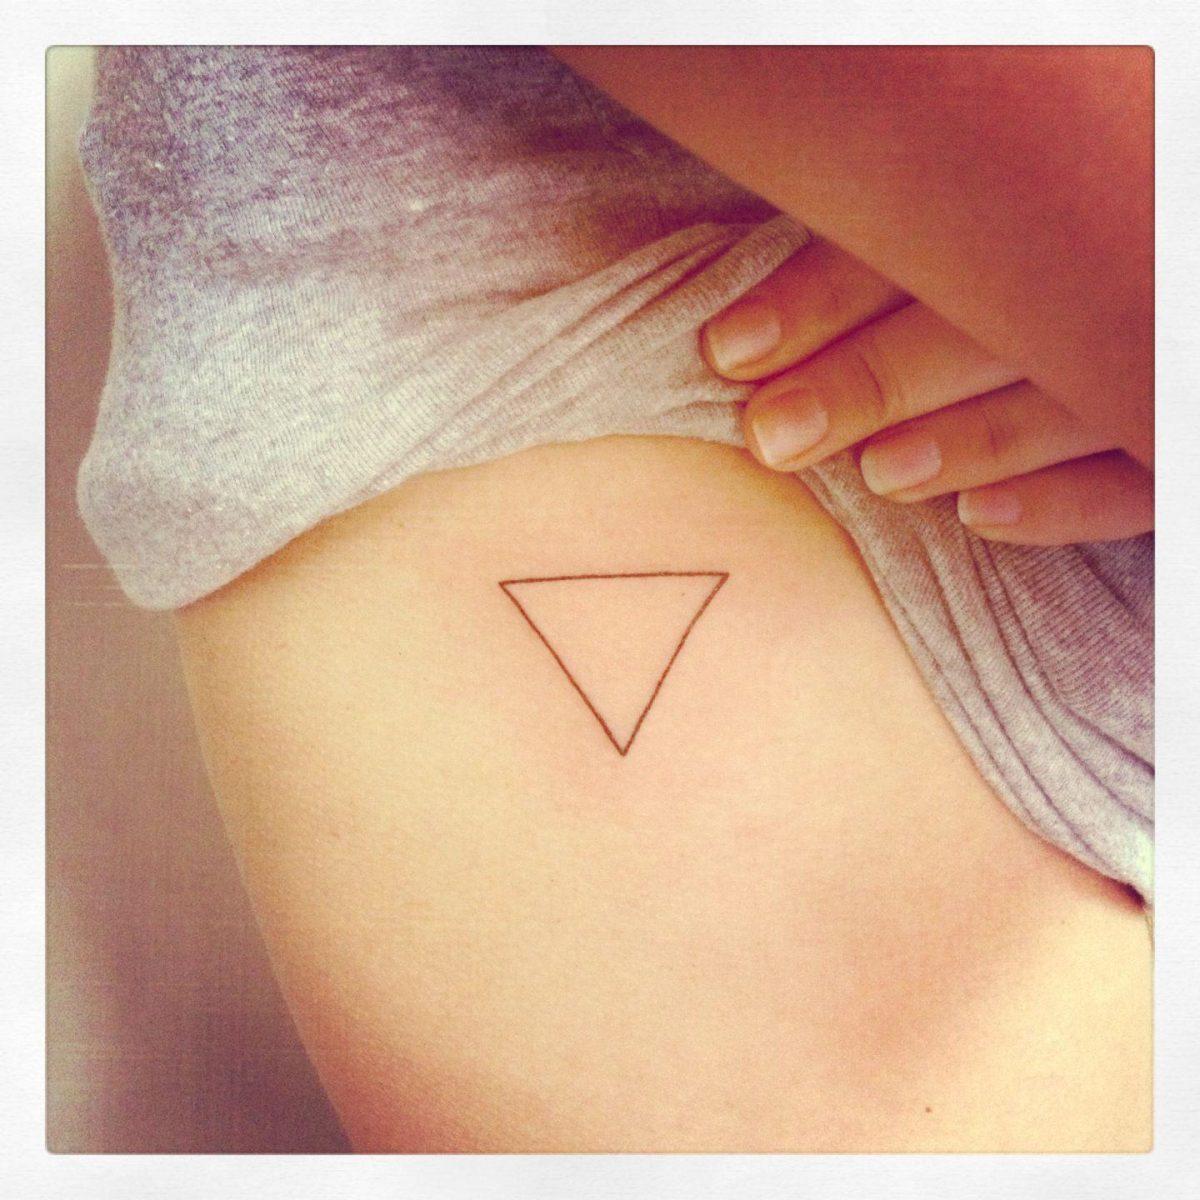 Photo of inverted triangle tattoo on body.